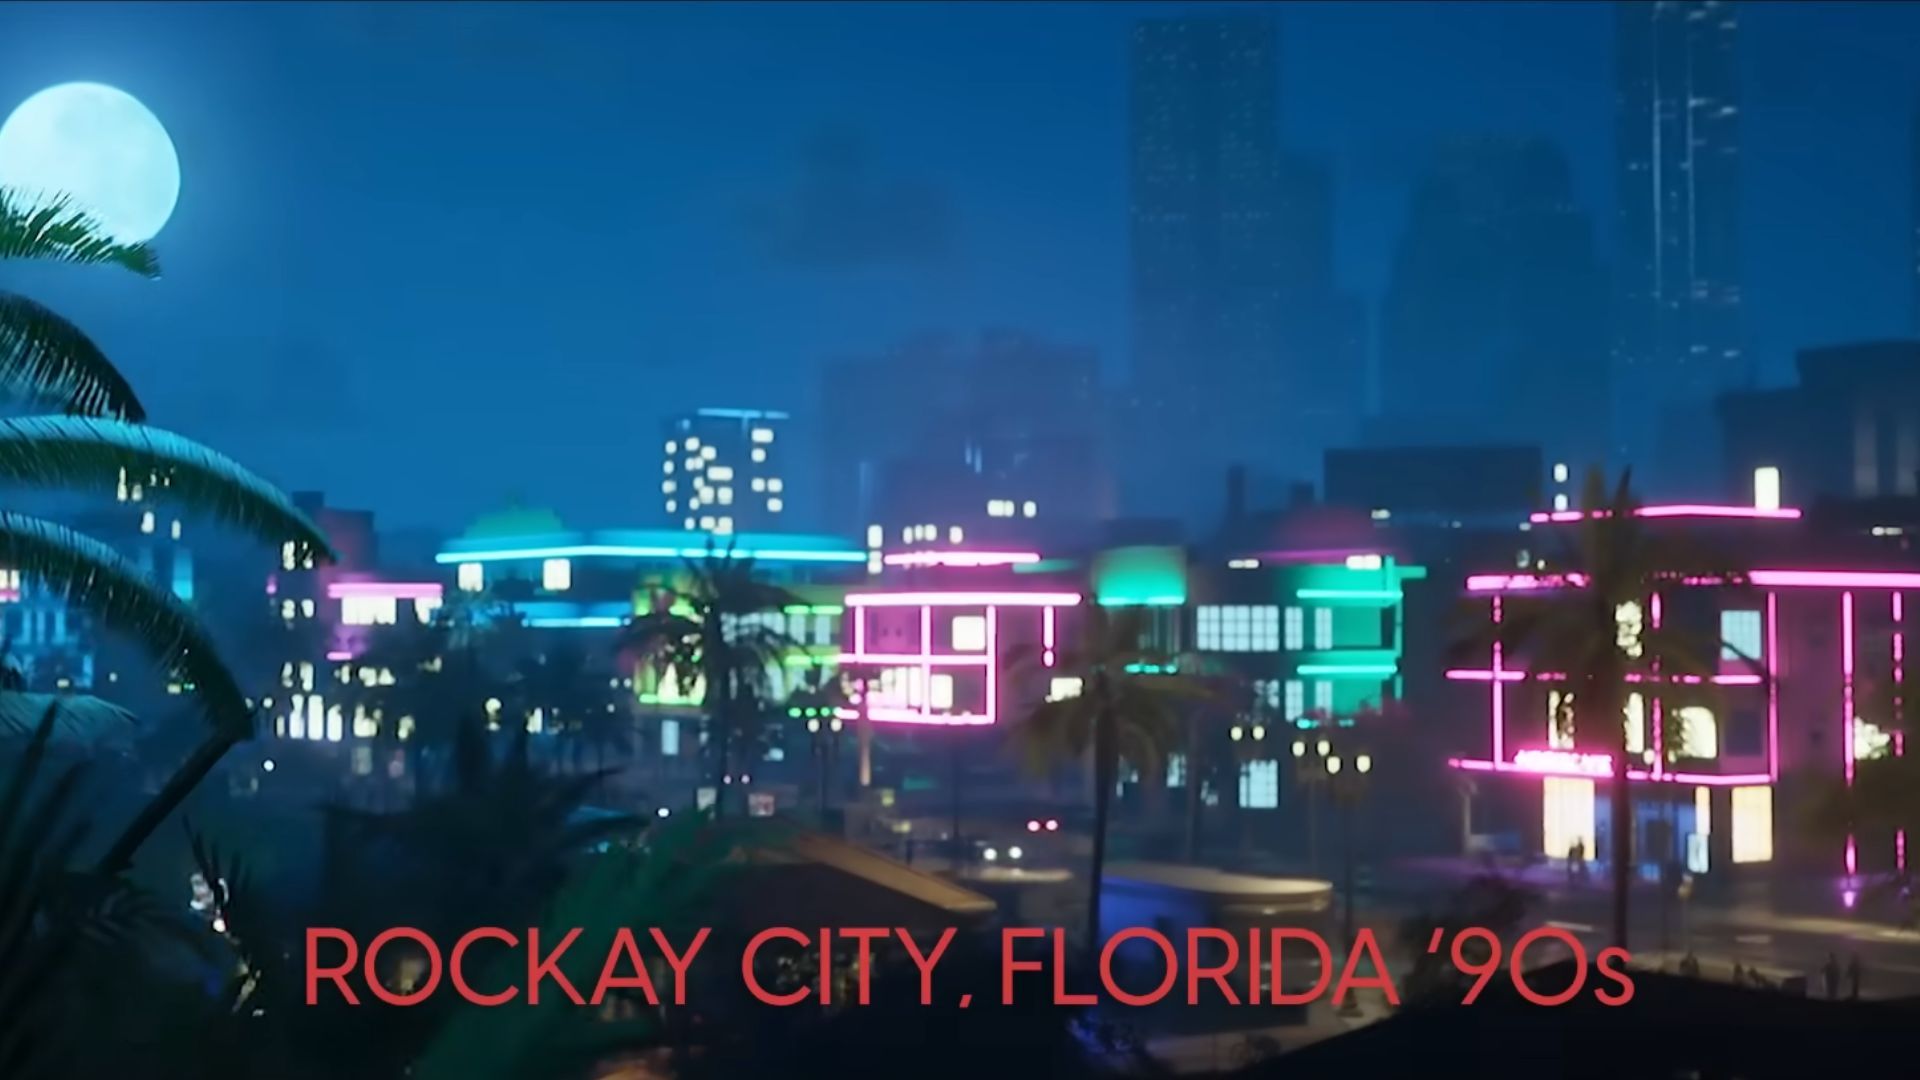 Crime Boss: Rockay City looks like 90s version of GTA with noticeable gameplay differences